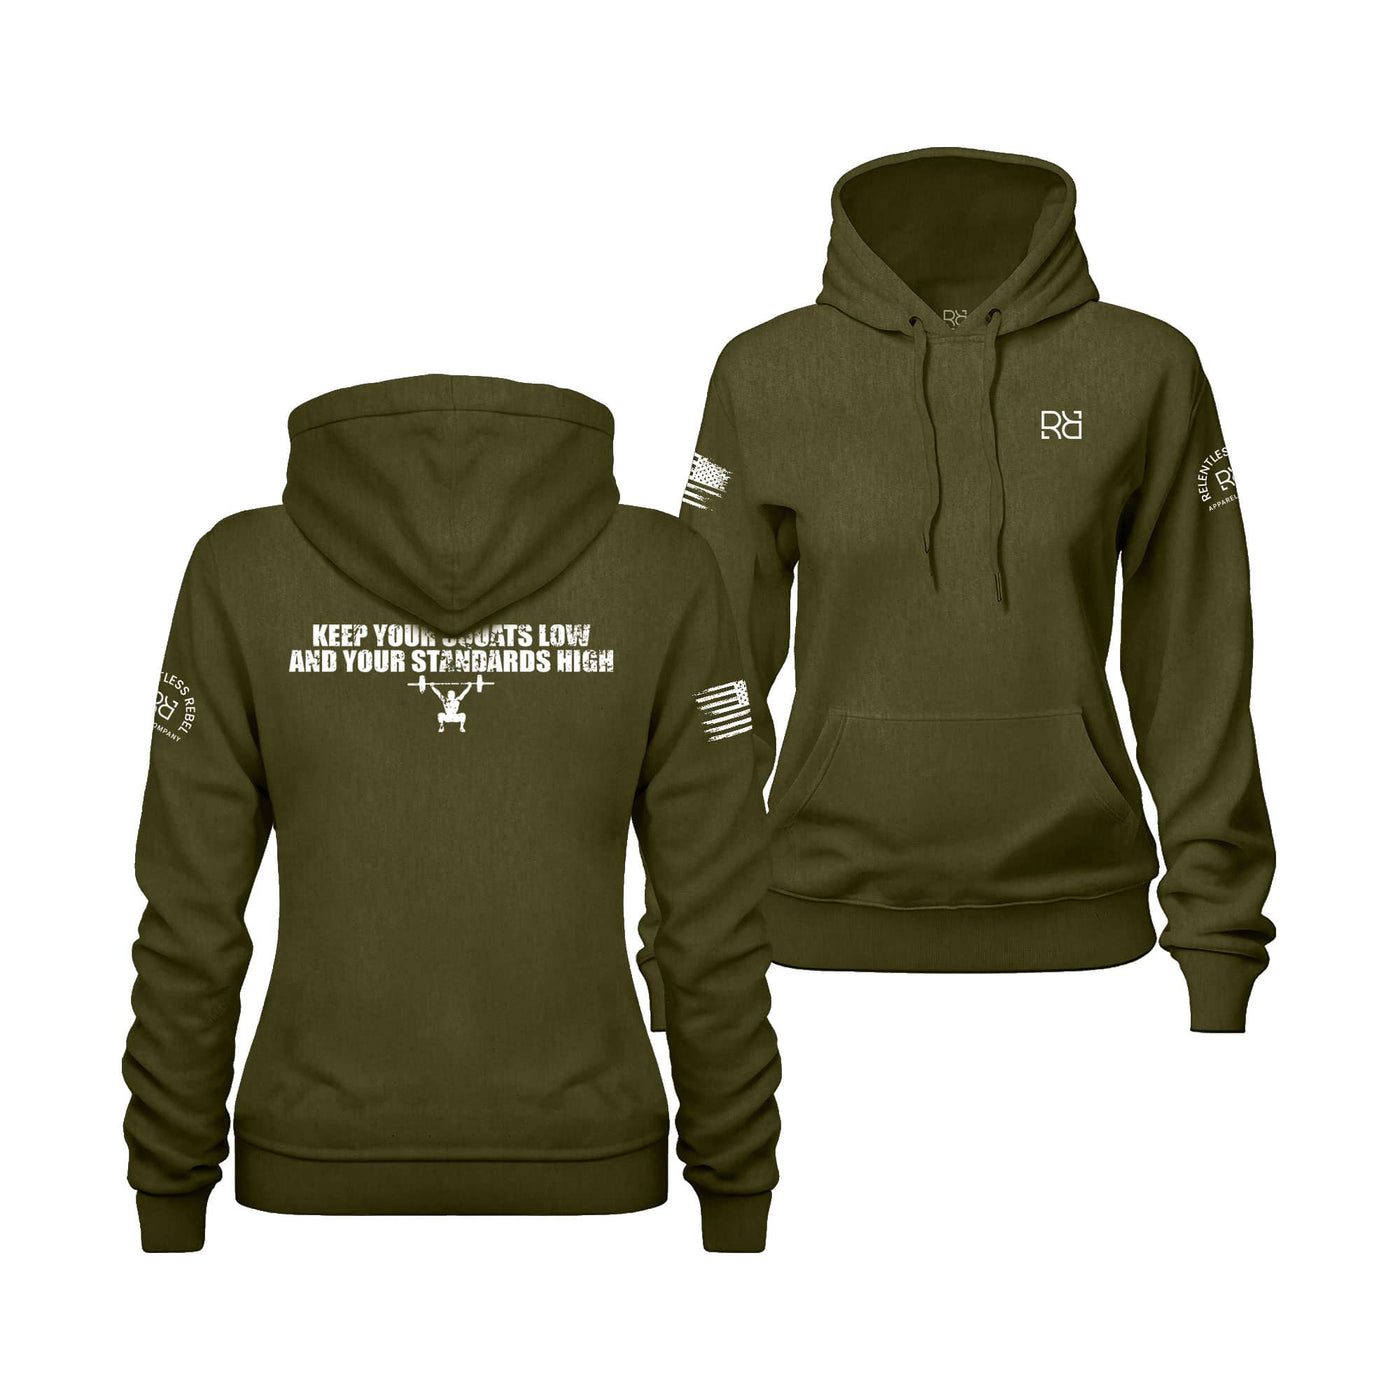 Military Green Women's Keep Your Squats Low and Your Standards High Back Design Hoodie